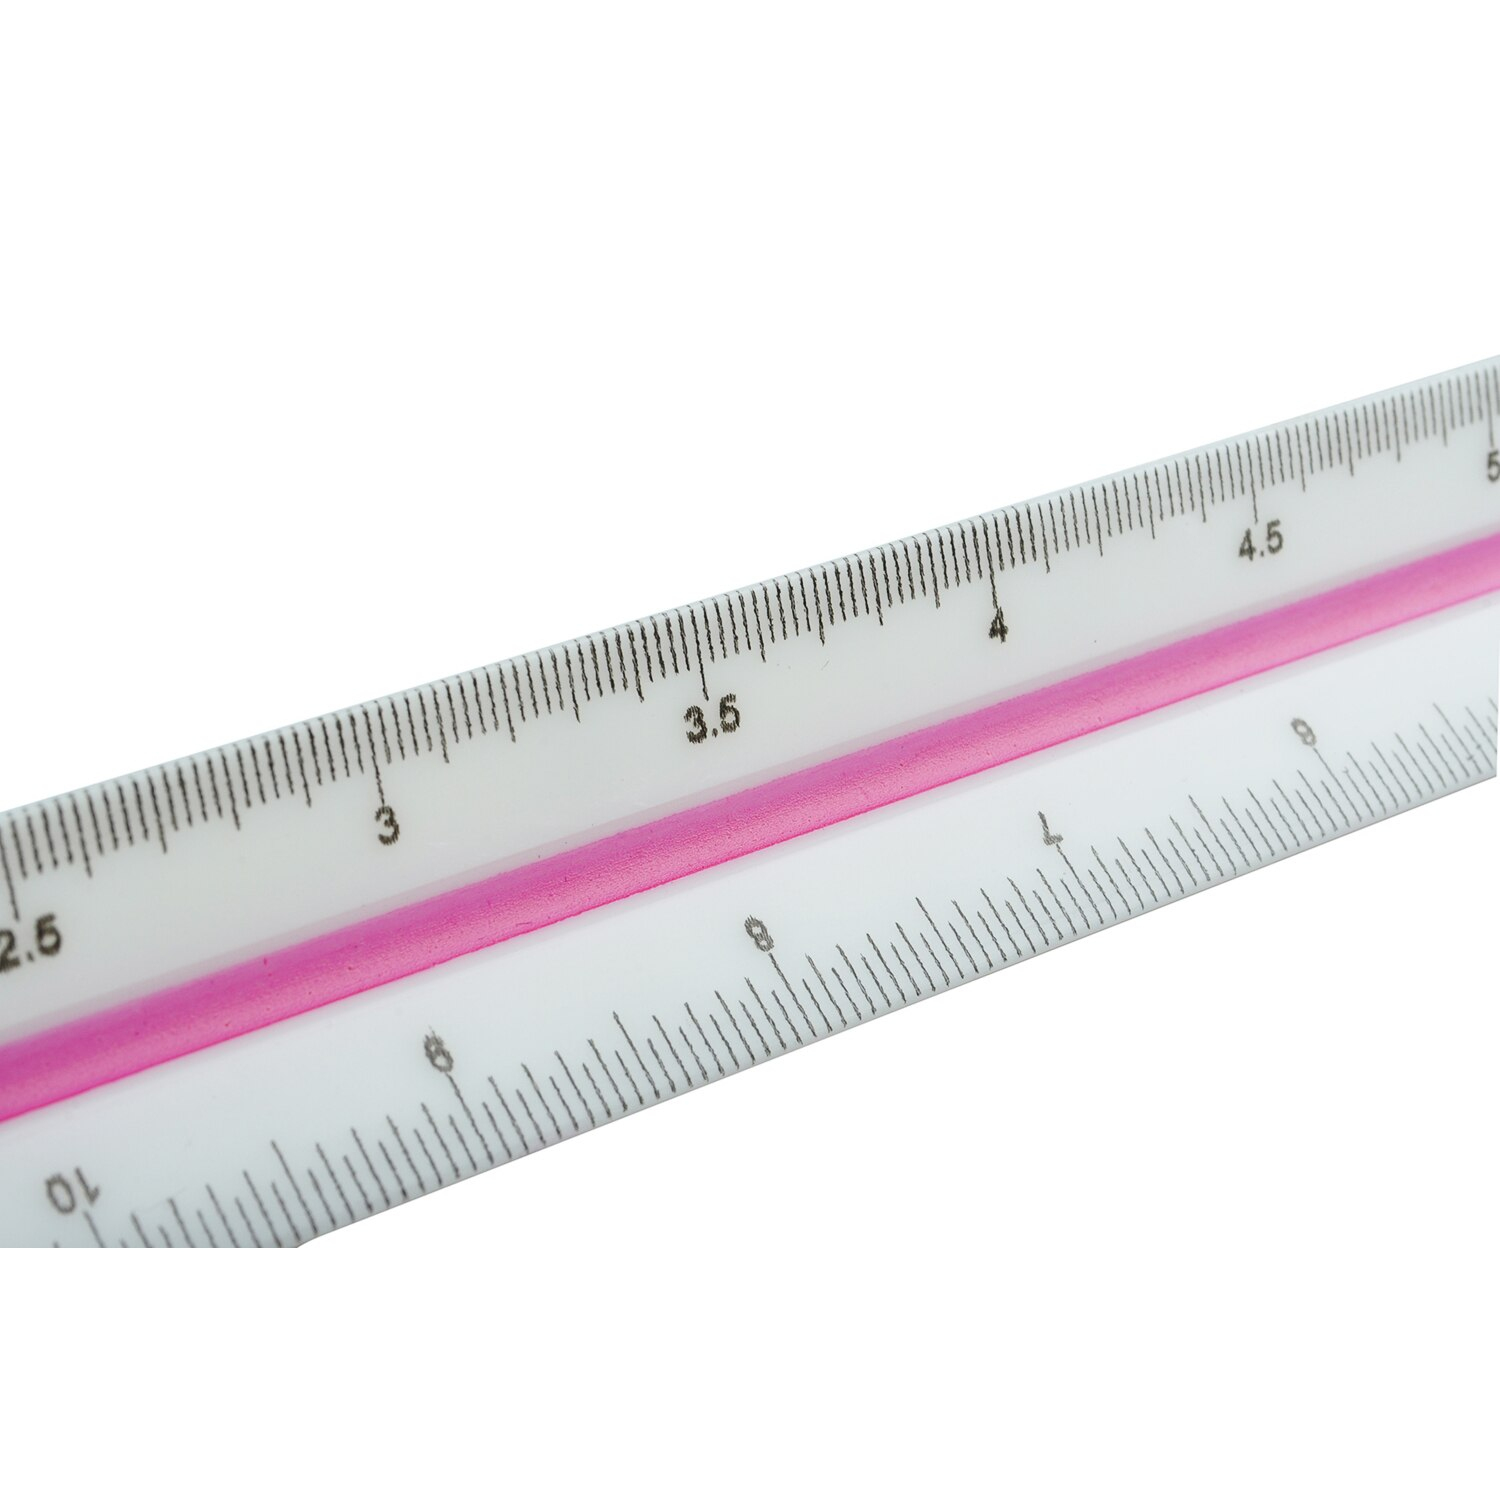 Us $3.44 |From 1:20 To 1:125 Engineer Metric Triangular Scale  Ruler|Triangular Scale Ruler|Scale Ruler|Triangular Scale - Aliexpress